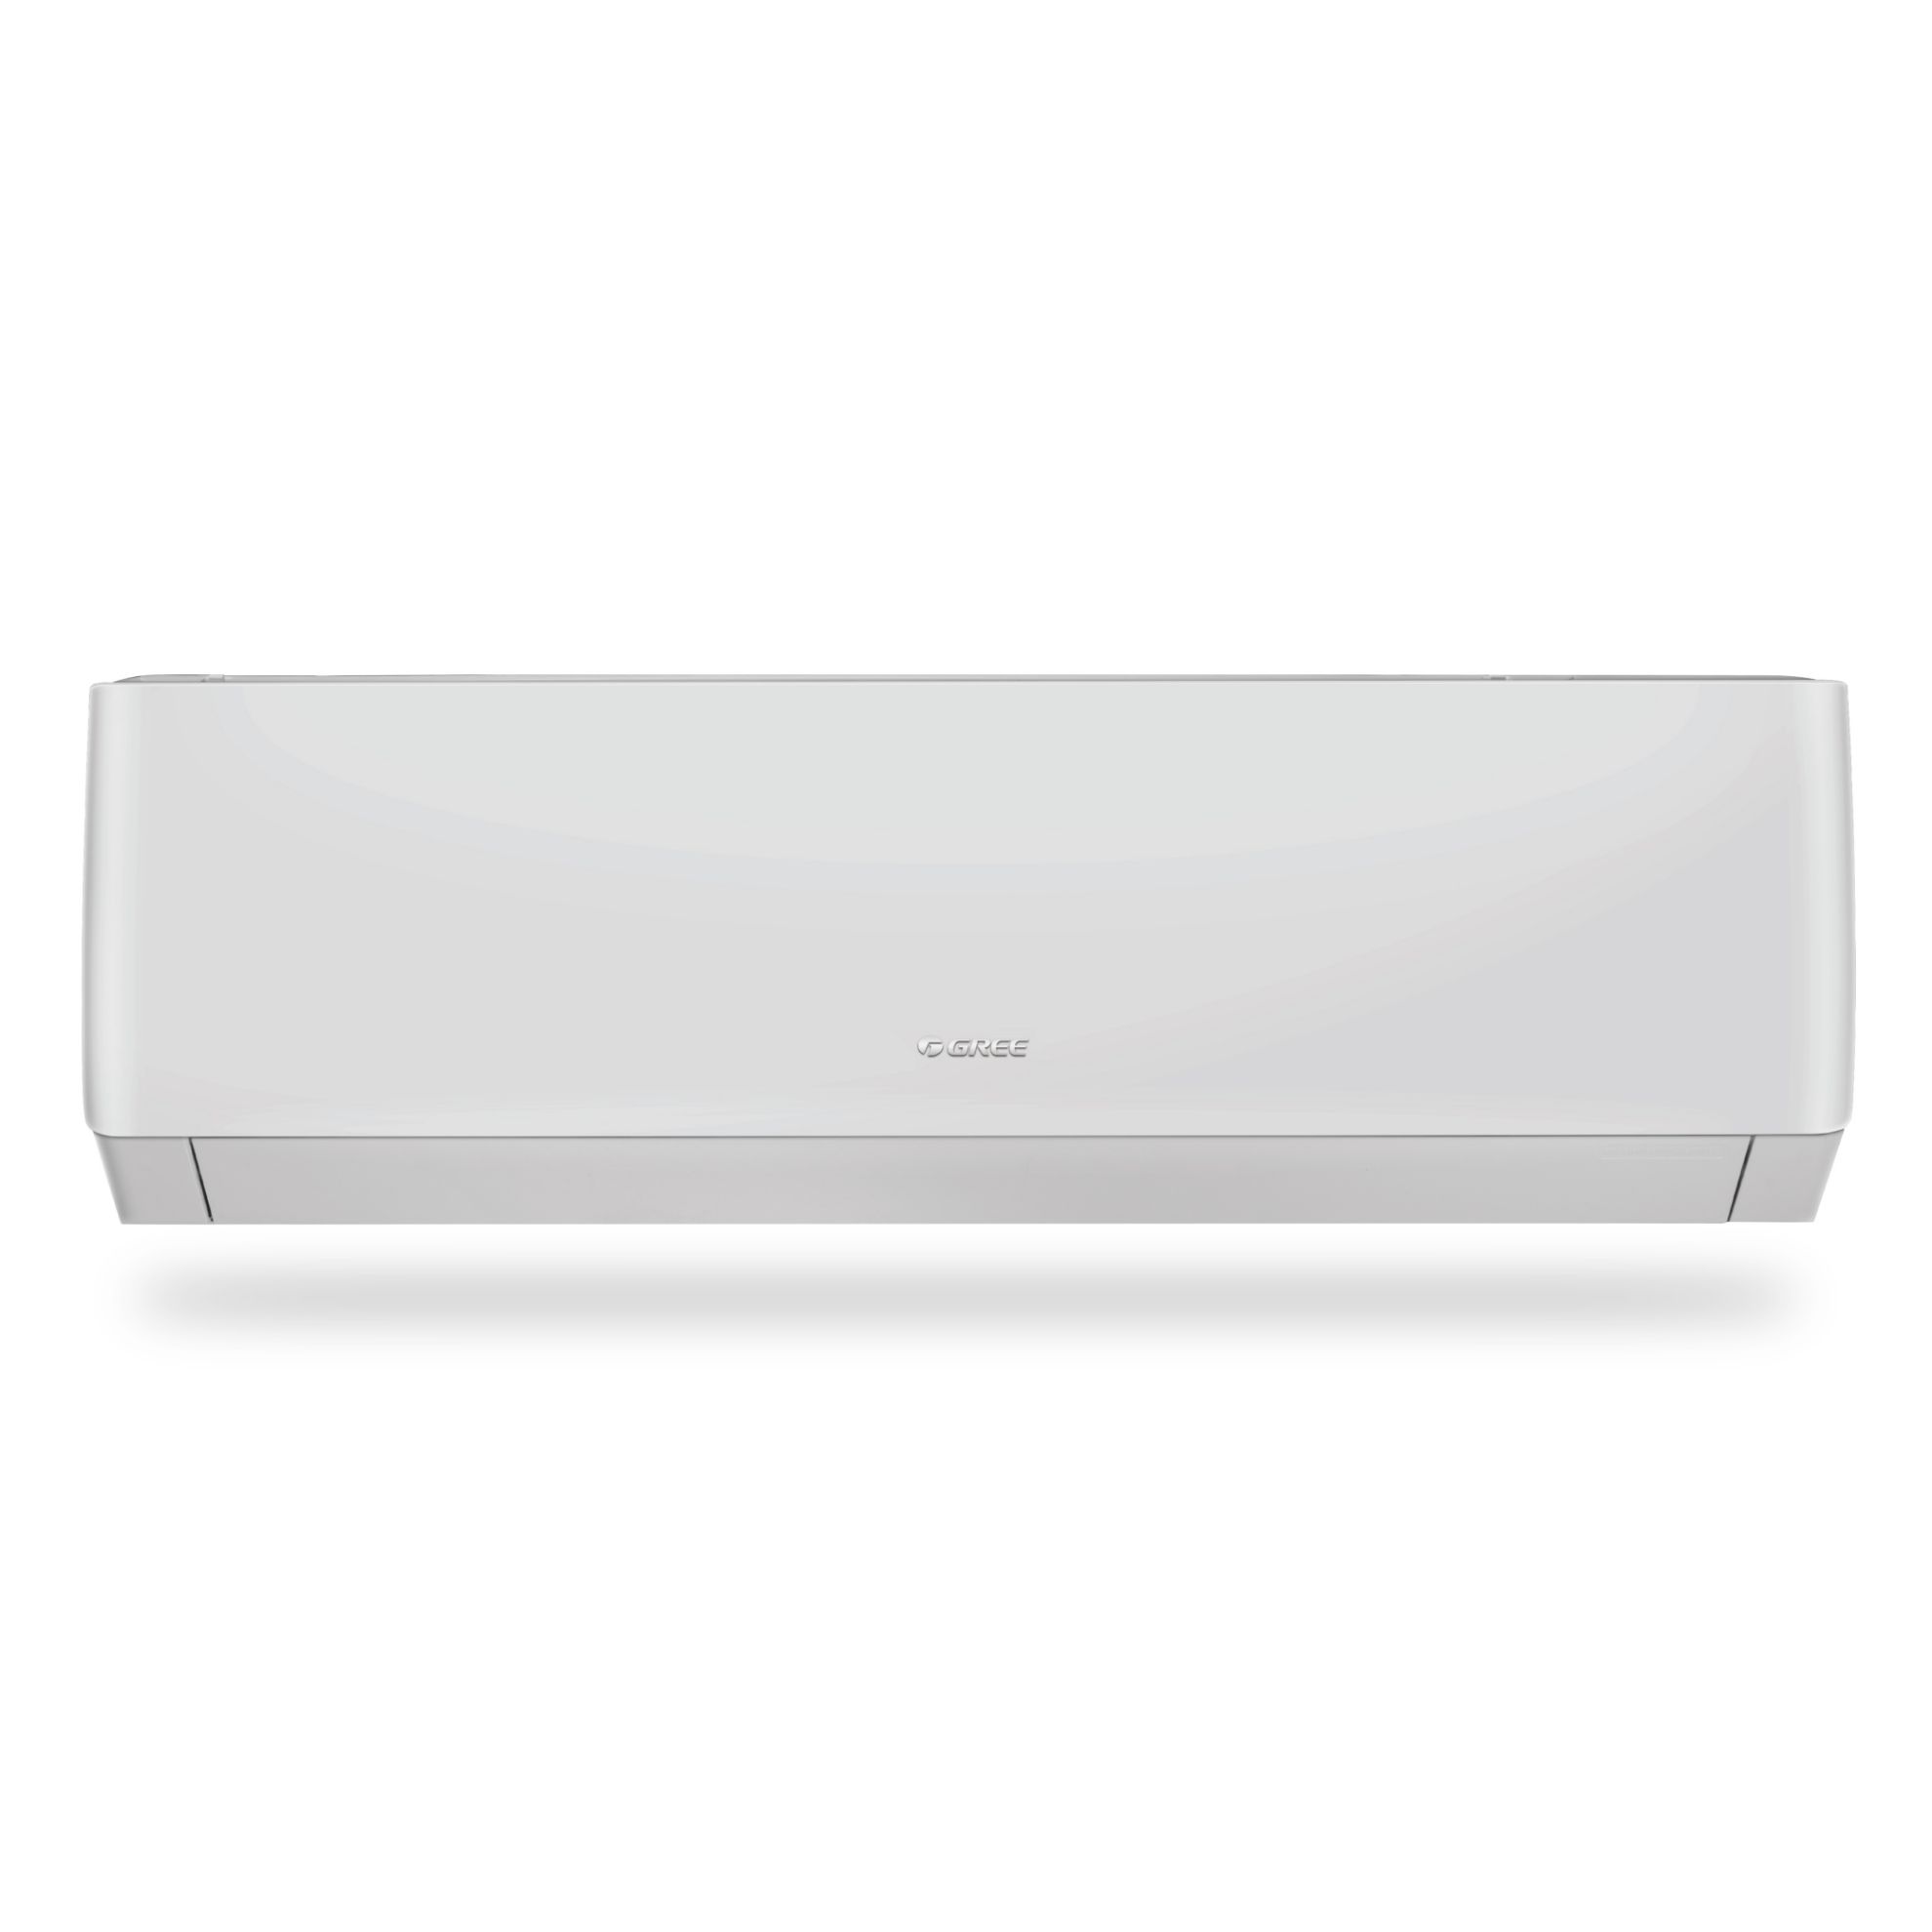 Picture of Gree - PULAR-R30C3 - 2.5 Ton|Rotary|Wall Split AC